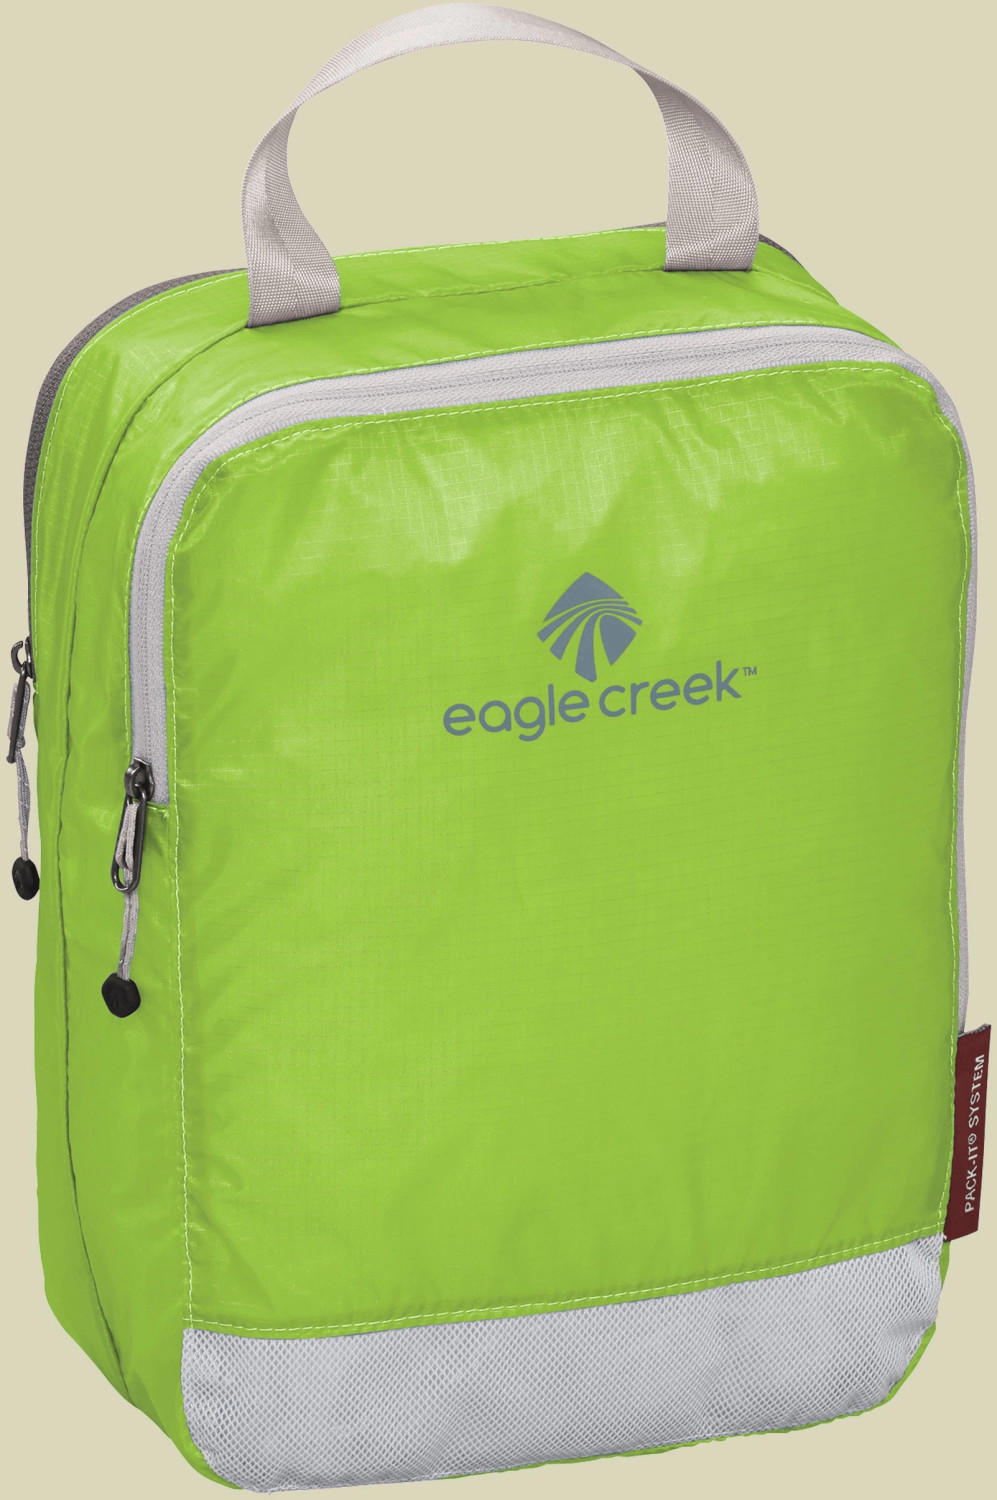 Eagle Creek Pack-It Specter Clean Dirty 1/2 Cube